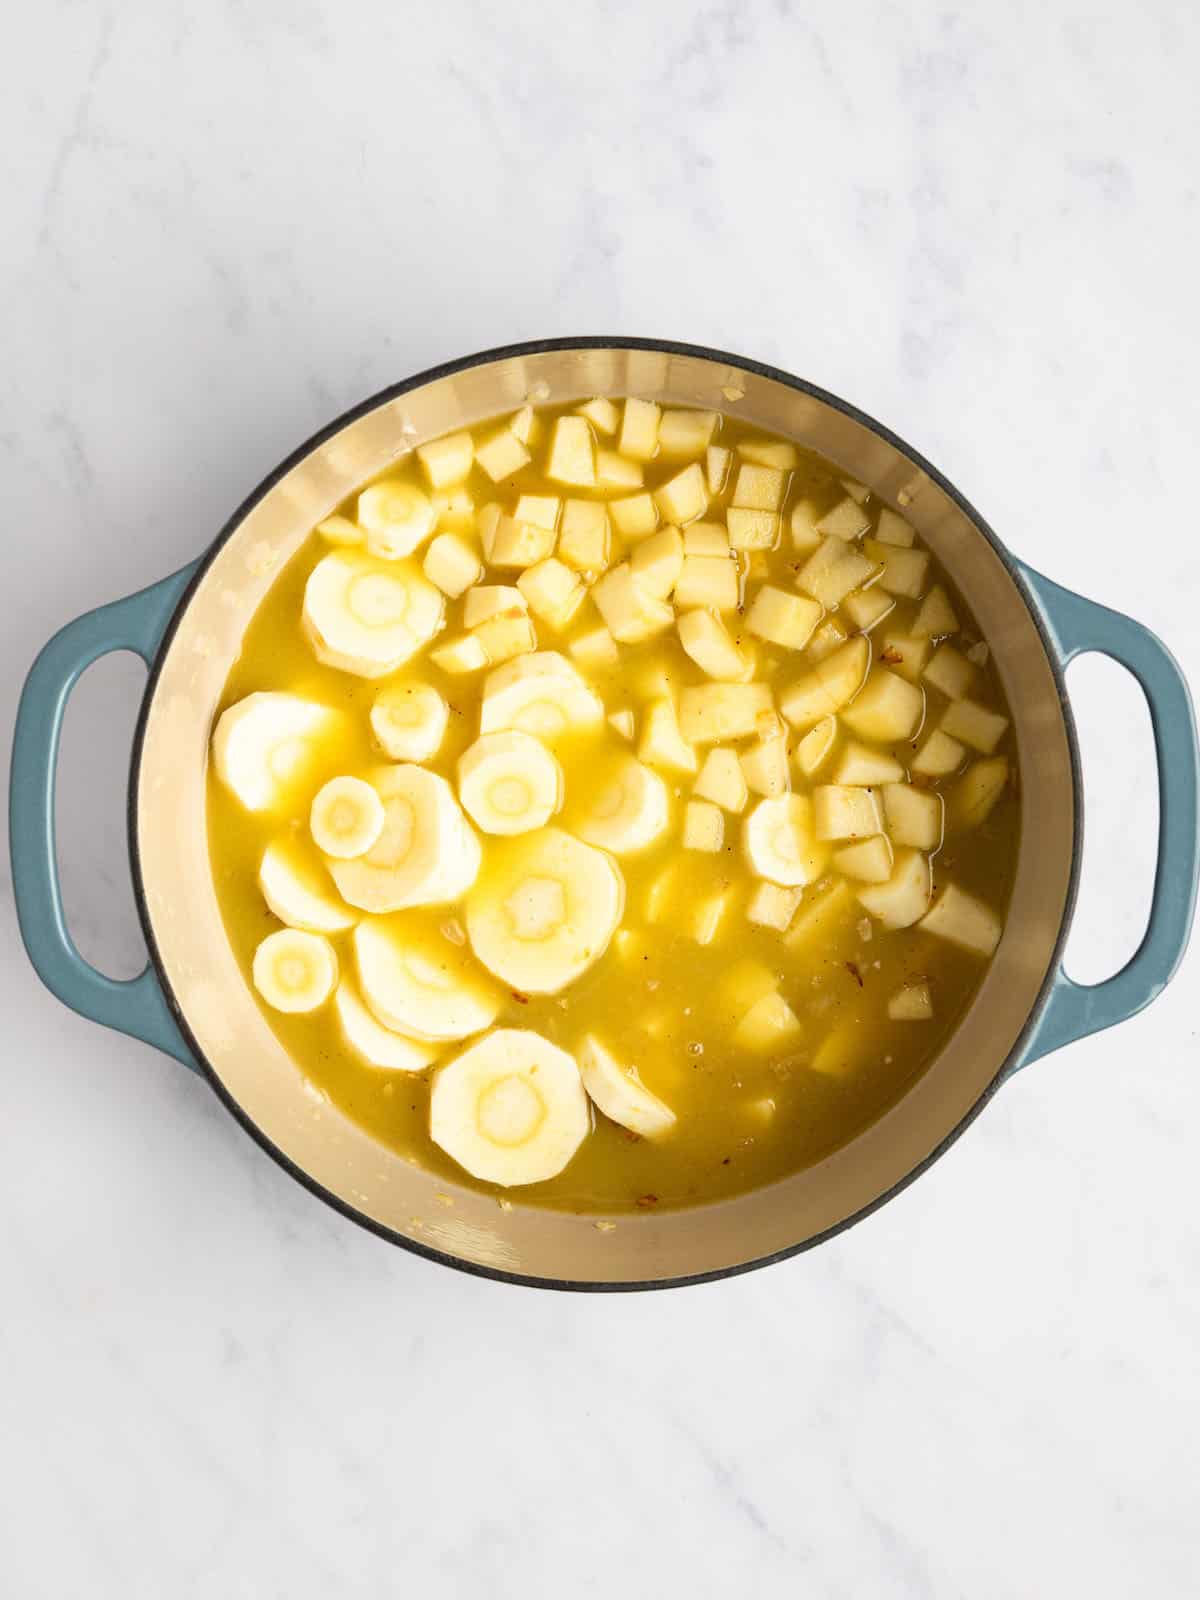 Potatoes, parsnips, apples, and broth in a large pot.